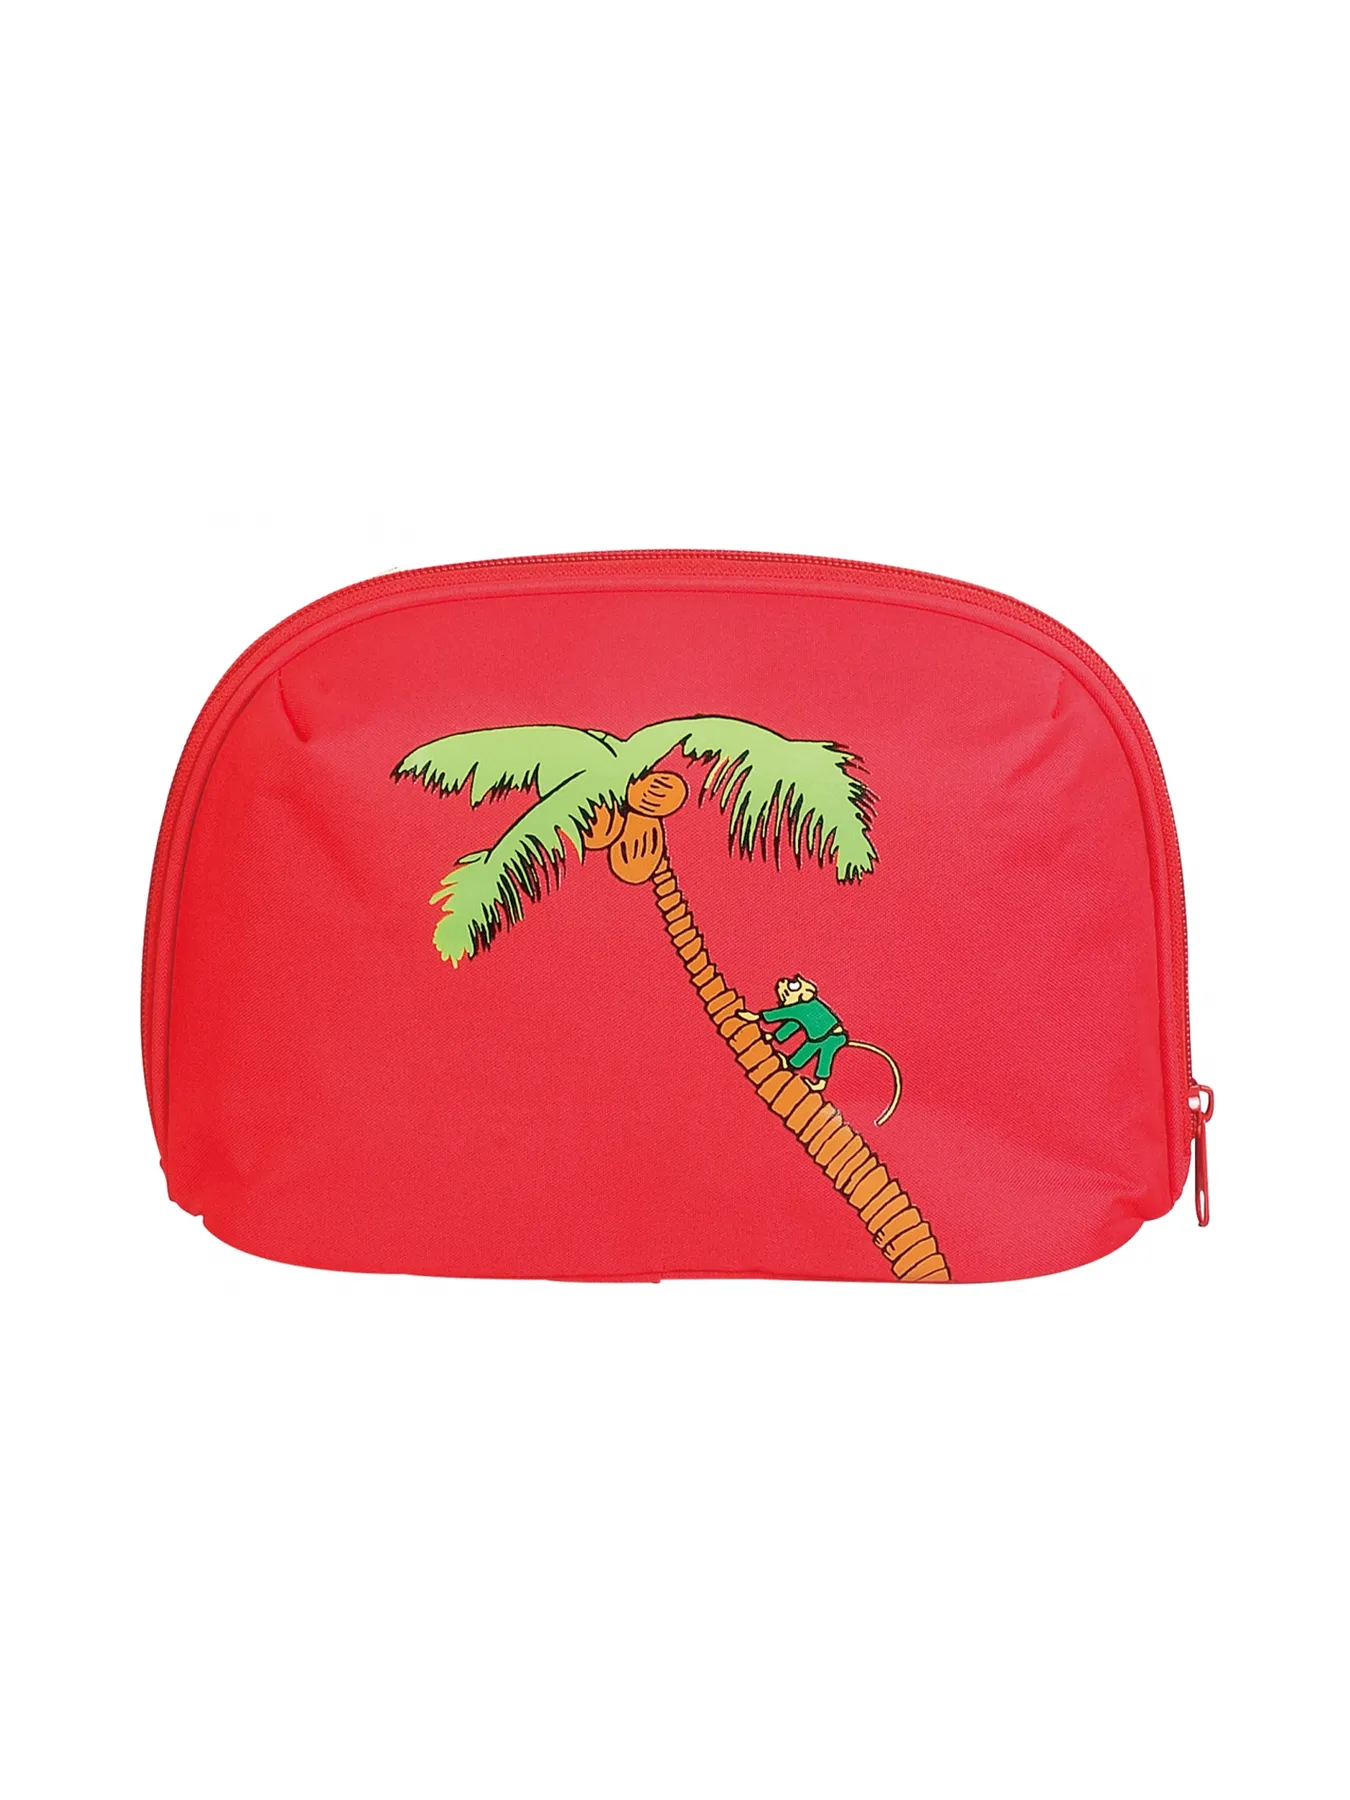 Toiletry Bag Pippi in the South Seas